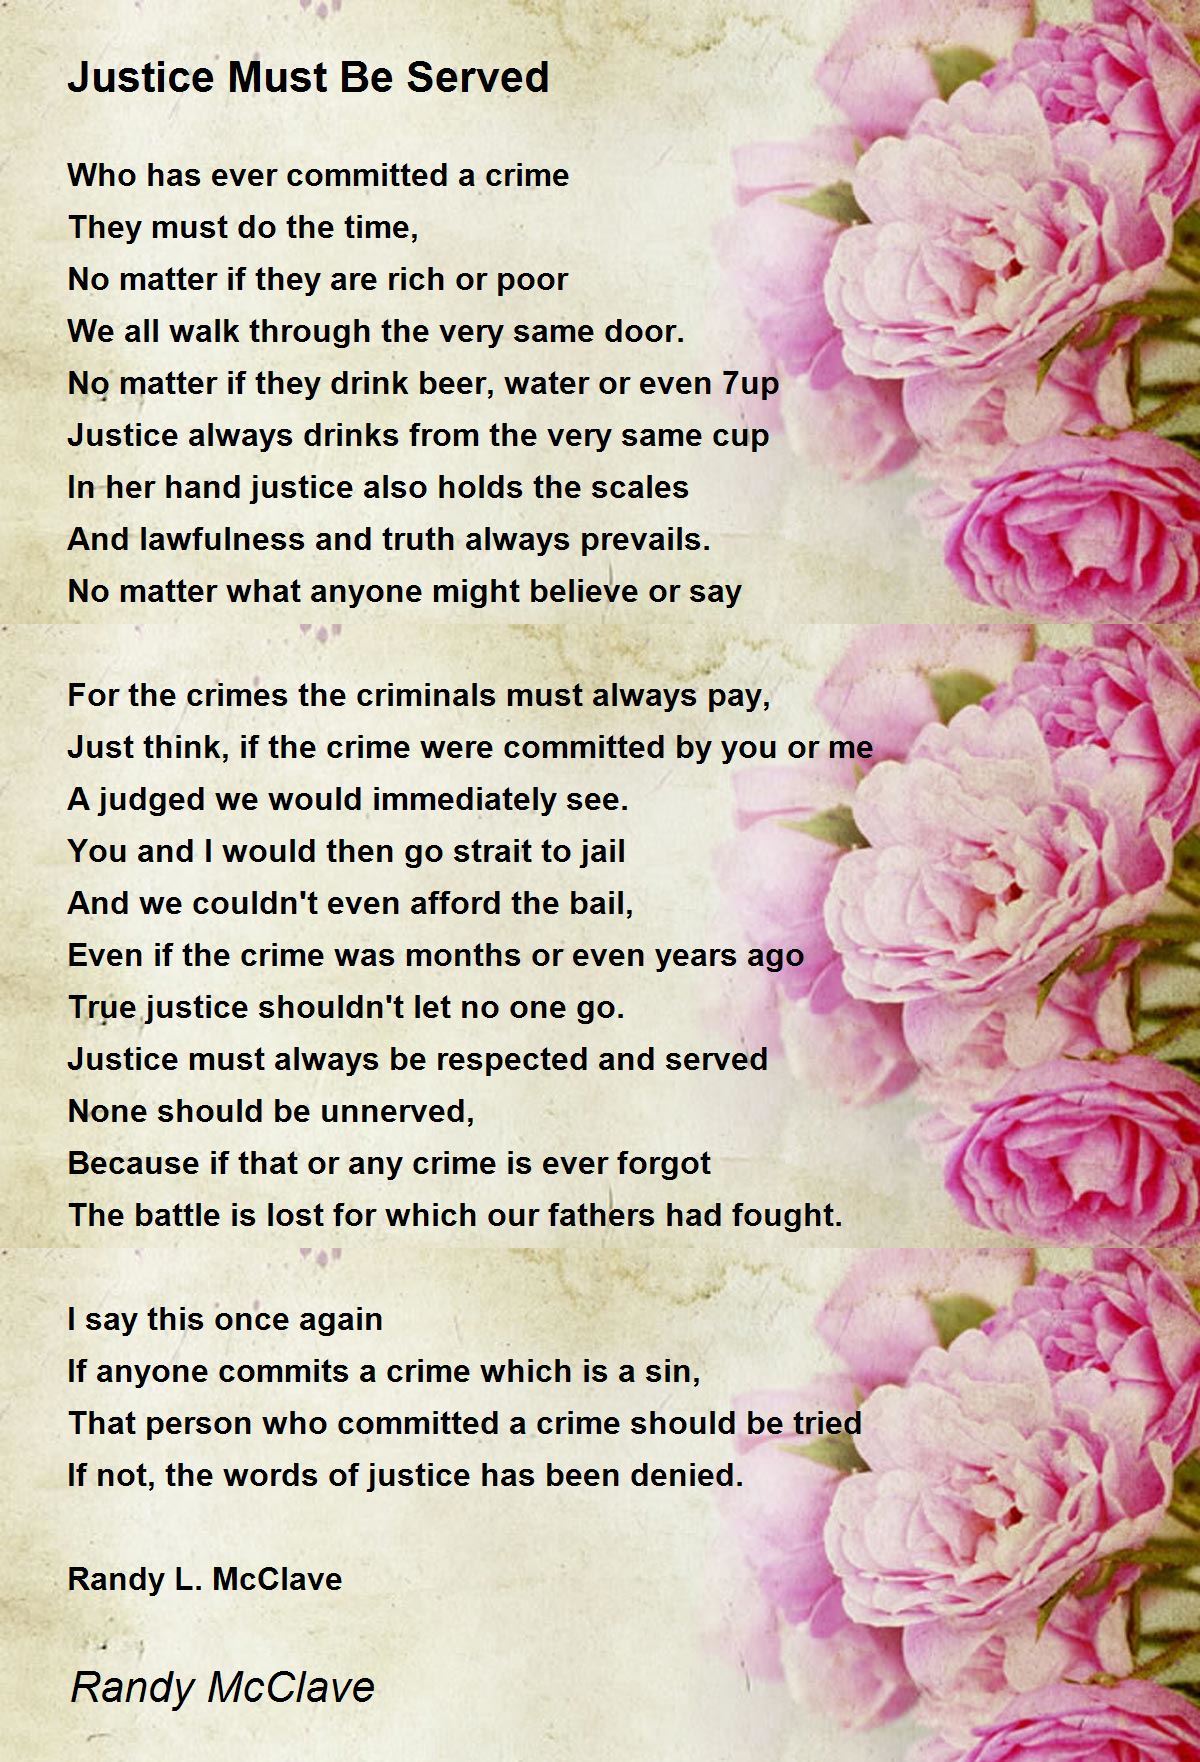 Justice Must Be Served - Justice Be Served Poem by Randy McClave